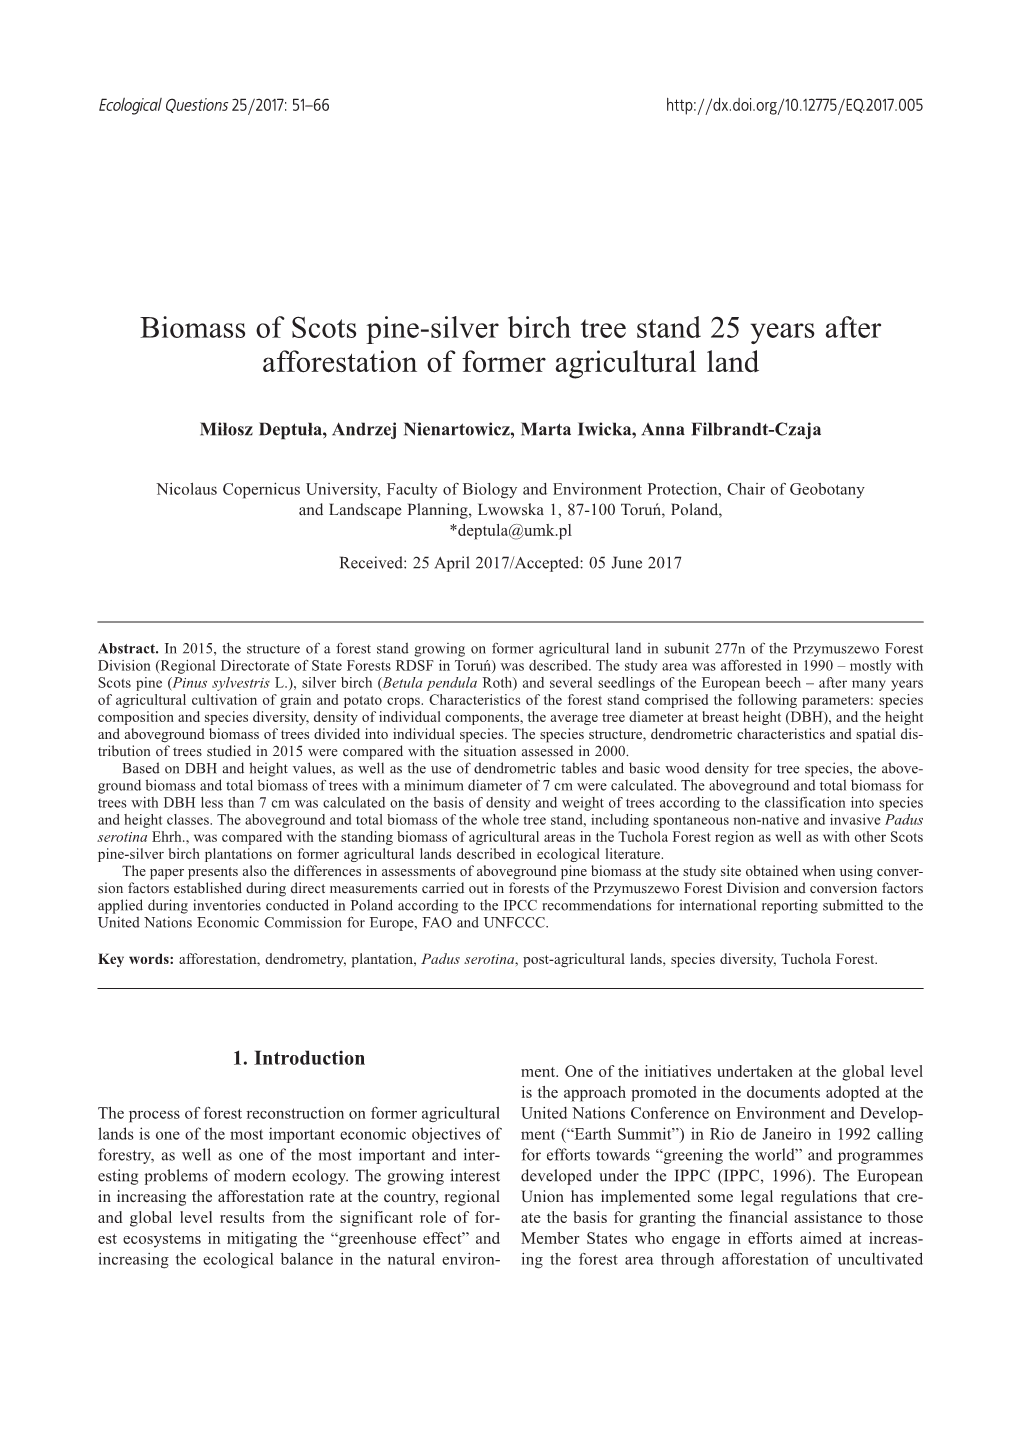 Biomass of Scots Pine-Silver Birch Tree Stand 25 Years After Afforestation of Former Agricultural Land